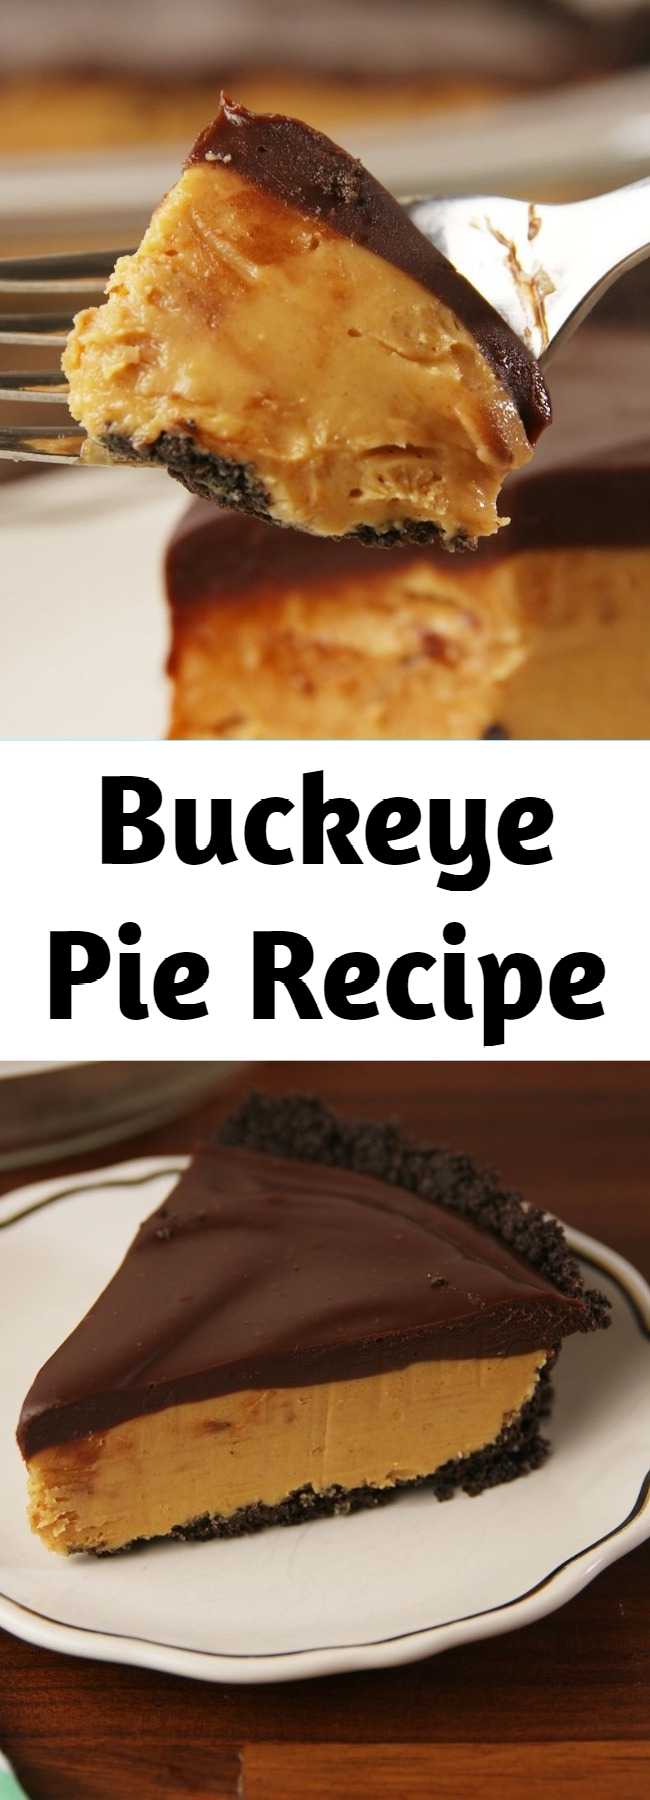 Buckeye Pie Recipe - Our love for buckeye everything knows no bounds, but this pie is our number one. It's rich enough for a holiday dessert, but also no bake, so you can make it all summer. #food #pastryporn #comfortfood #kids #easyrecipe #recipe #inspiration #ideas #diy #home